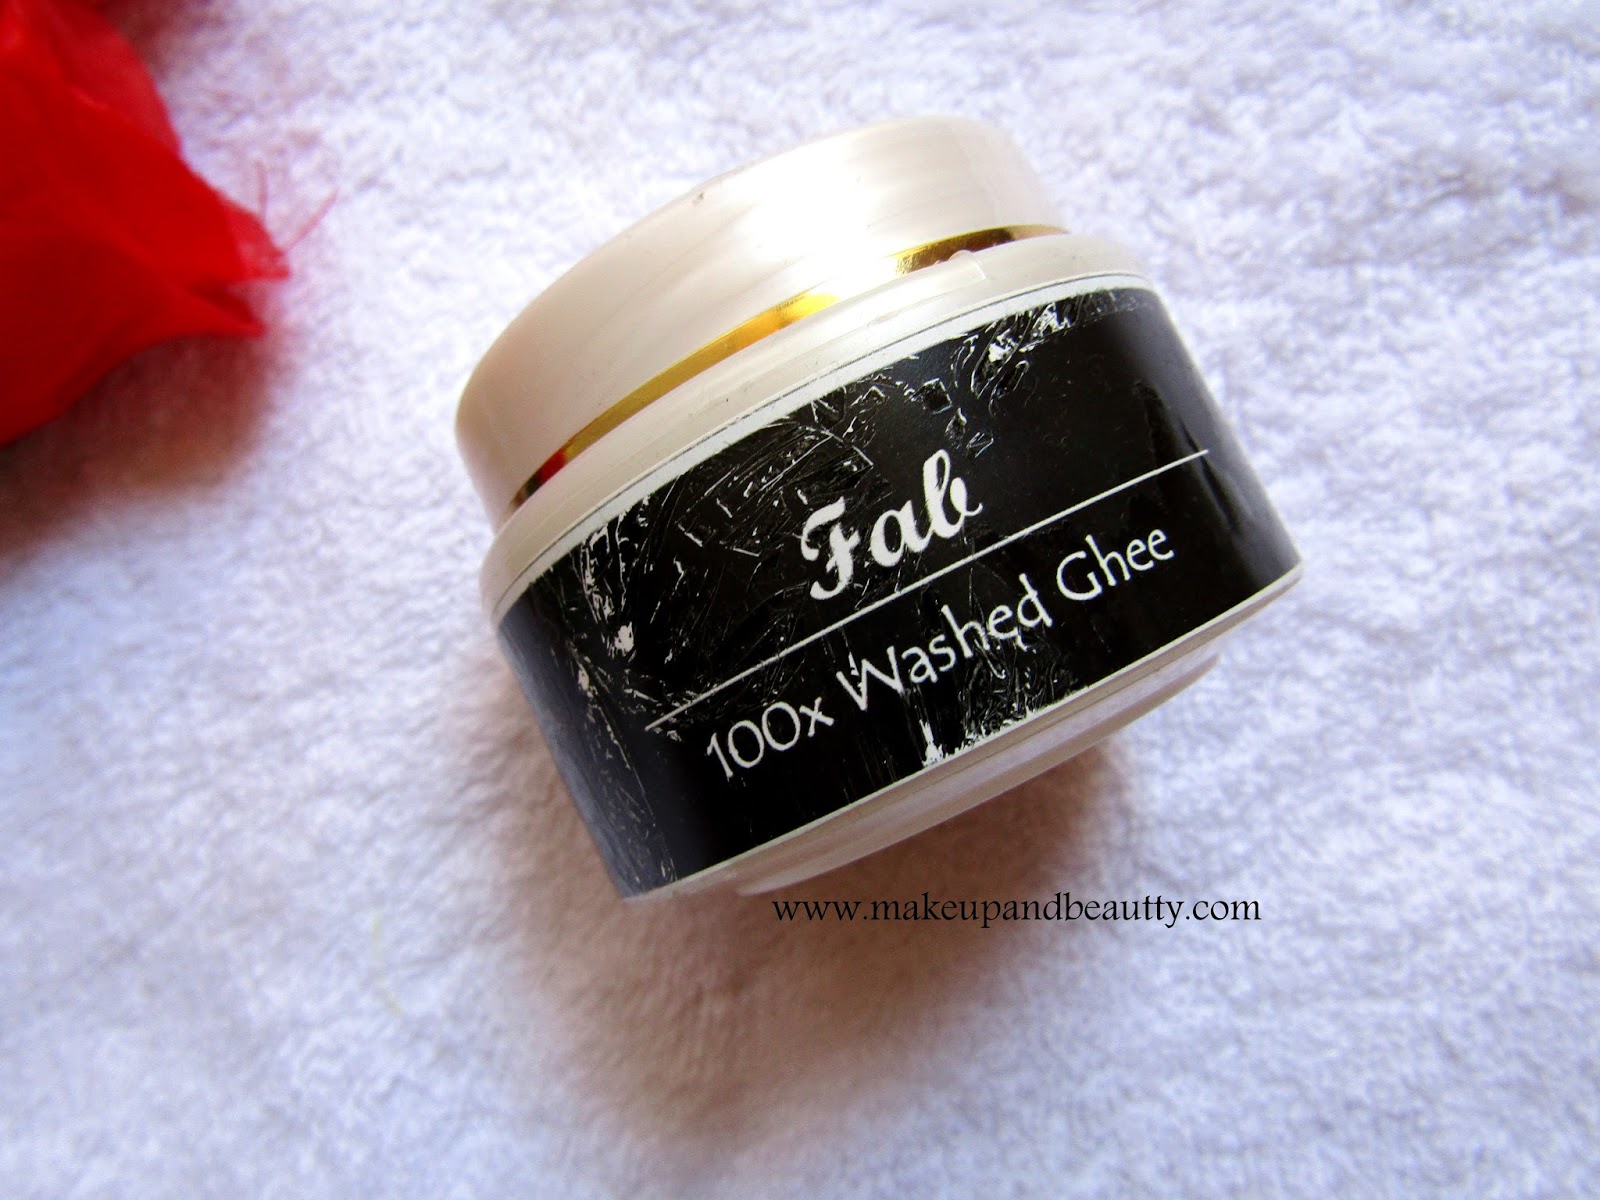 Makeup and beauty !!!: Review of Fab - 100x Washed Ghee